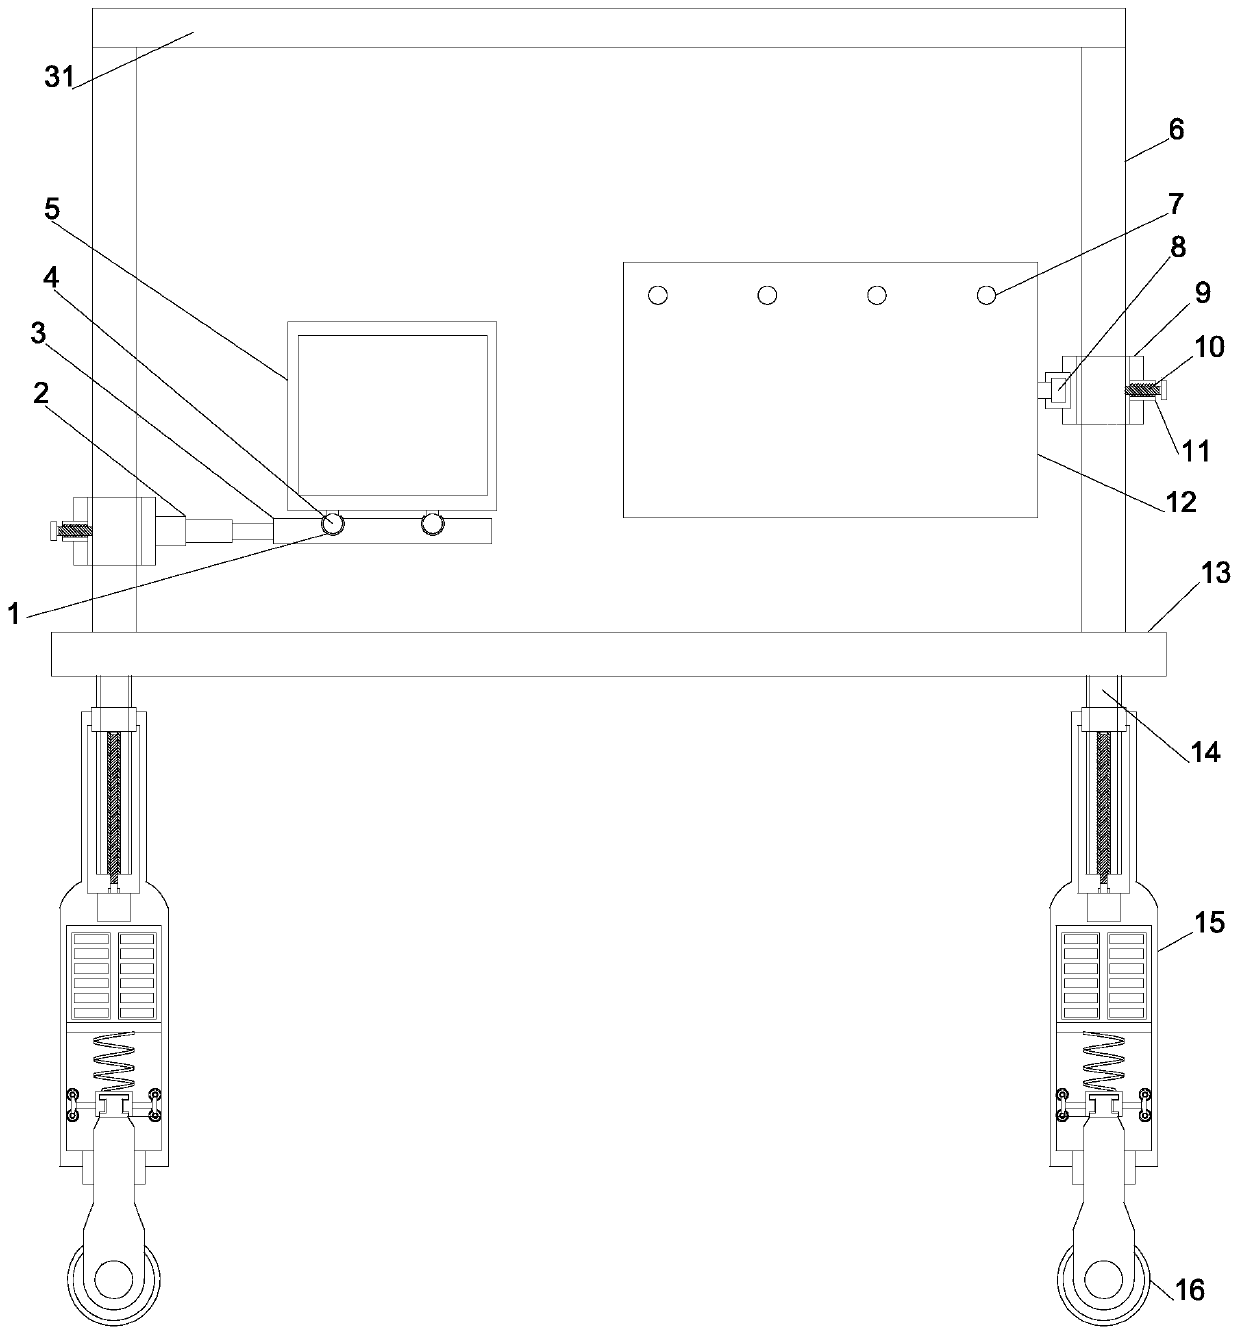 Real object and diagram rapid display device for e-commerce teaching